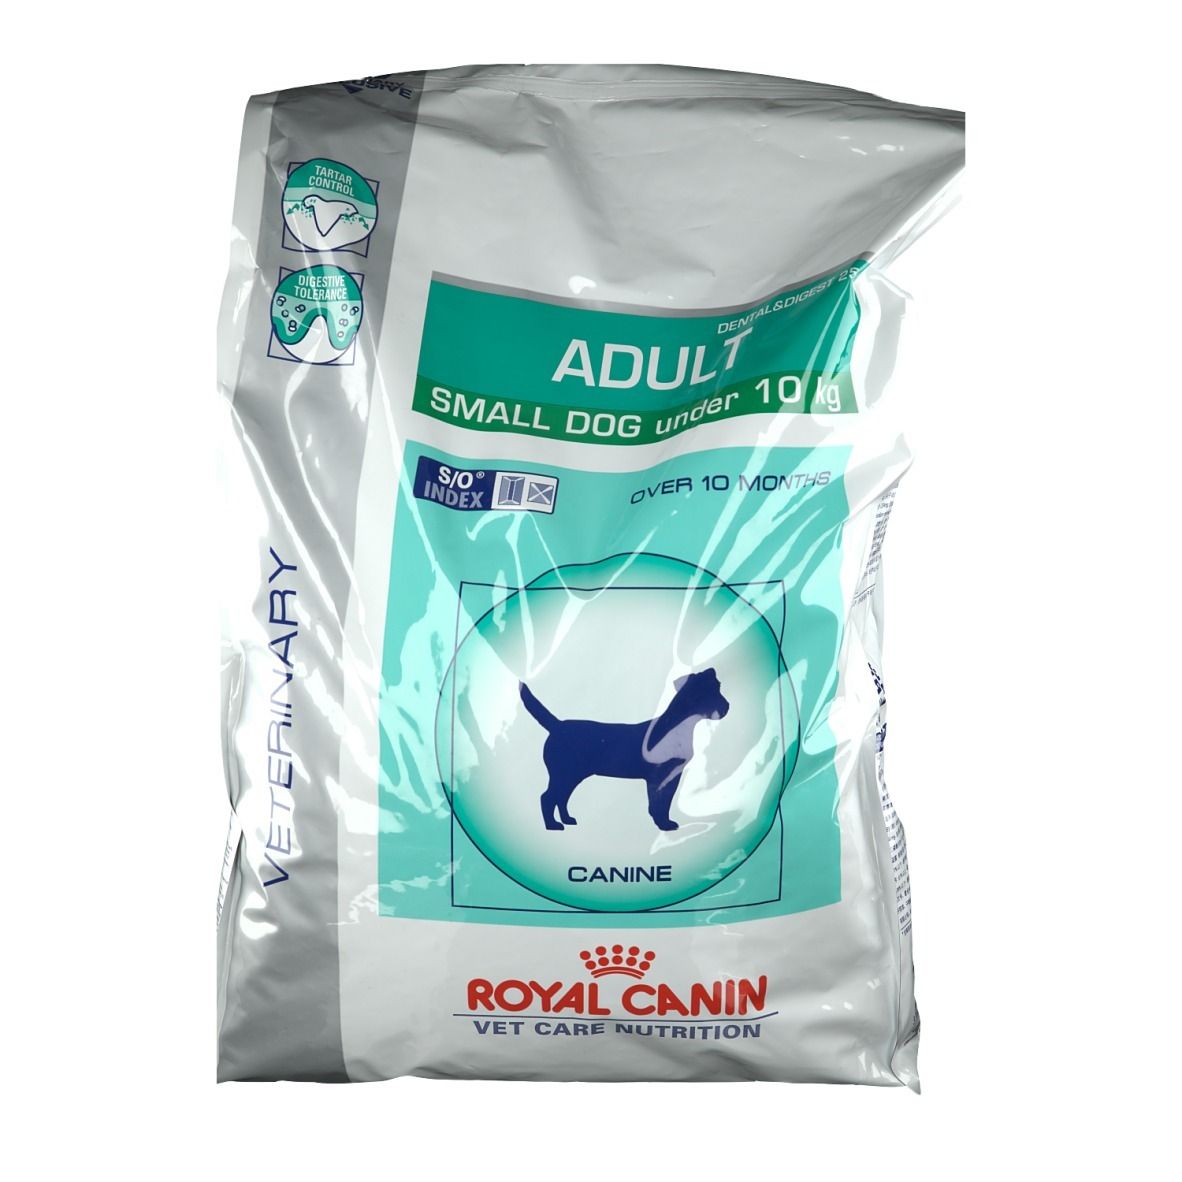 ROYAL CANIN® Veterinary Care Nutrition Adult Small Dog Dental & Digest Hund